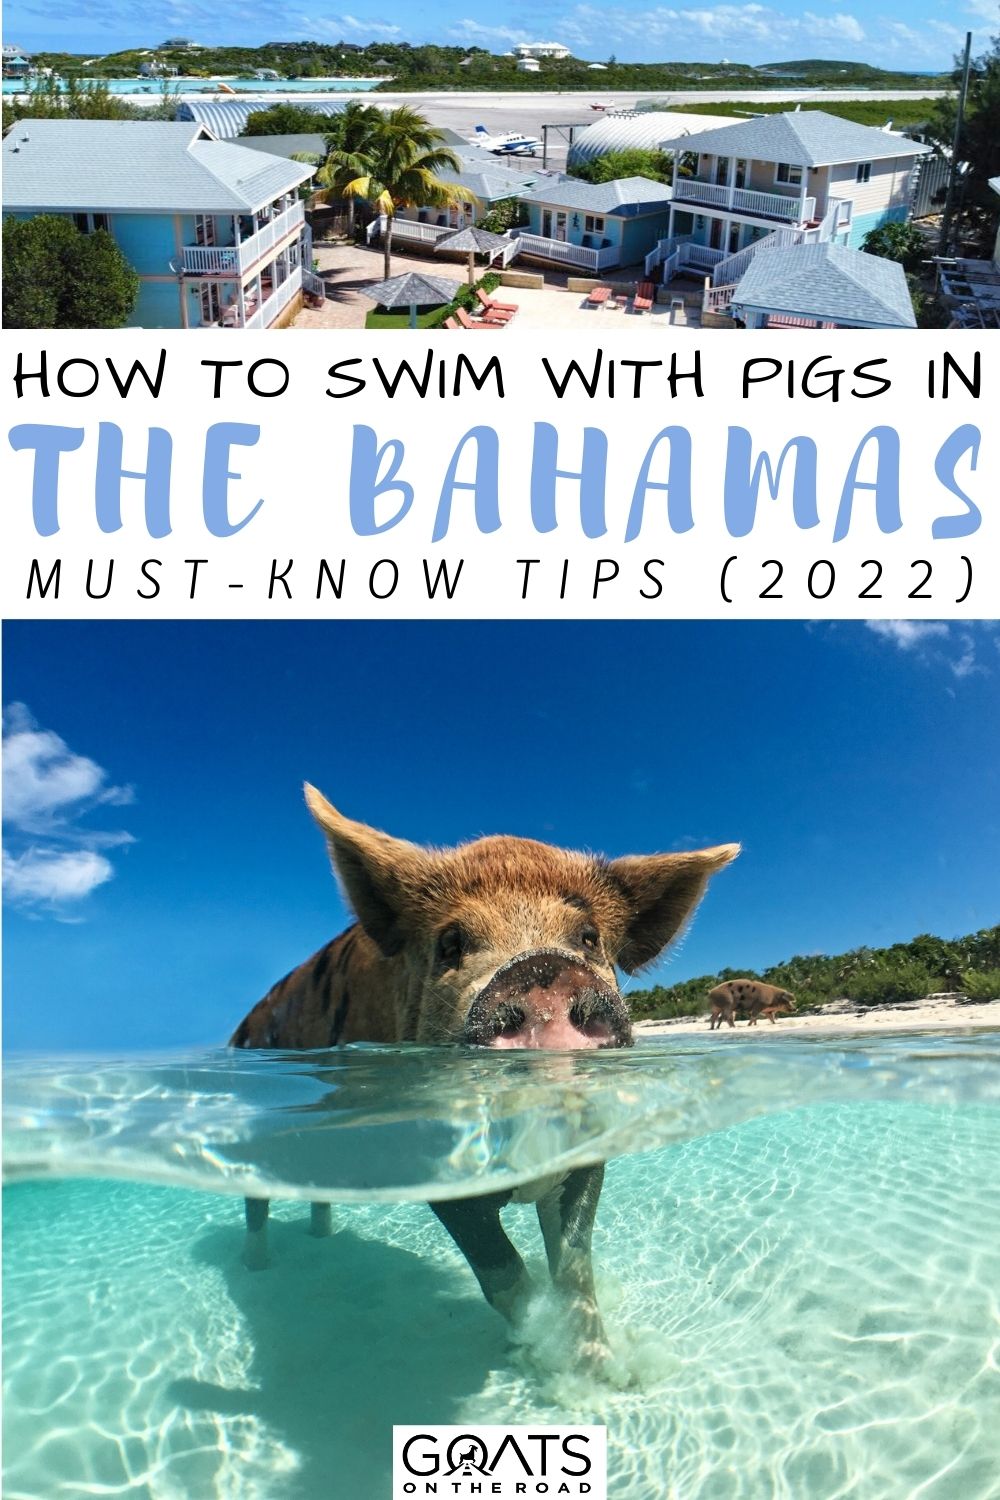 “How To Swim With Pigs In The Bahamas: Must-Know Tips (2022)